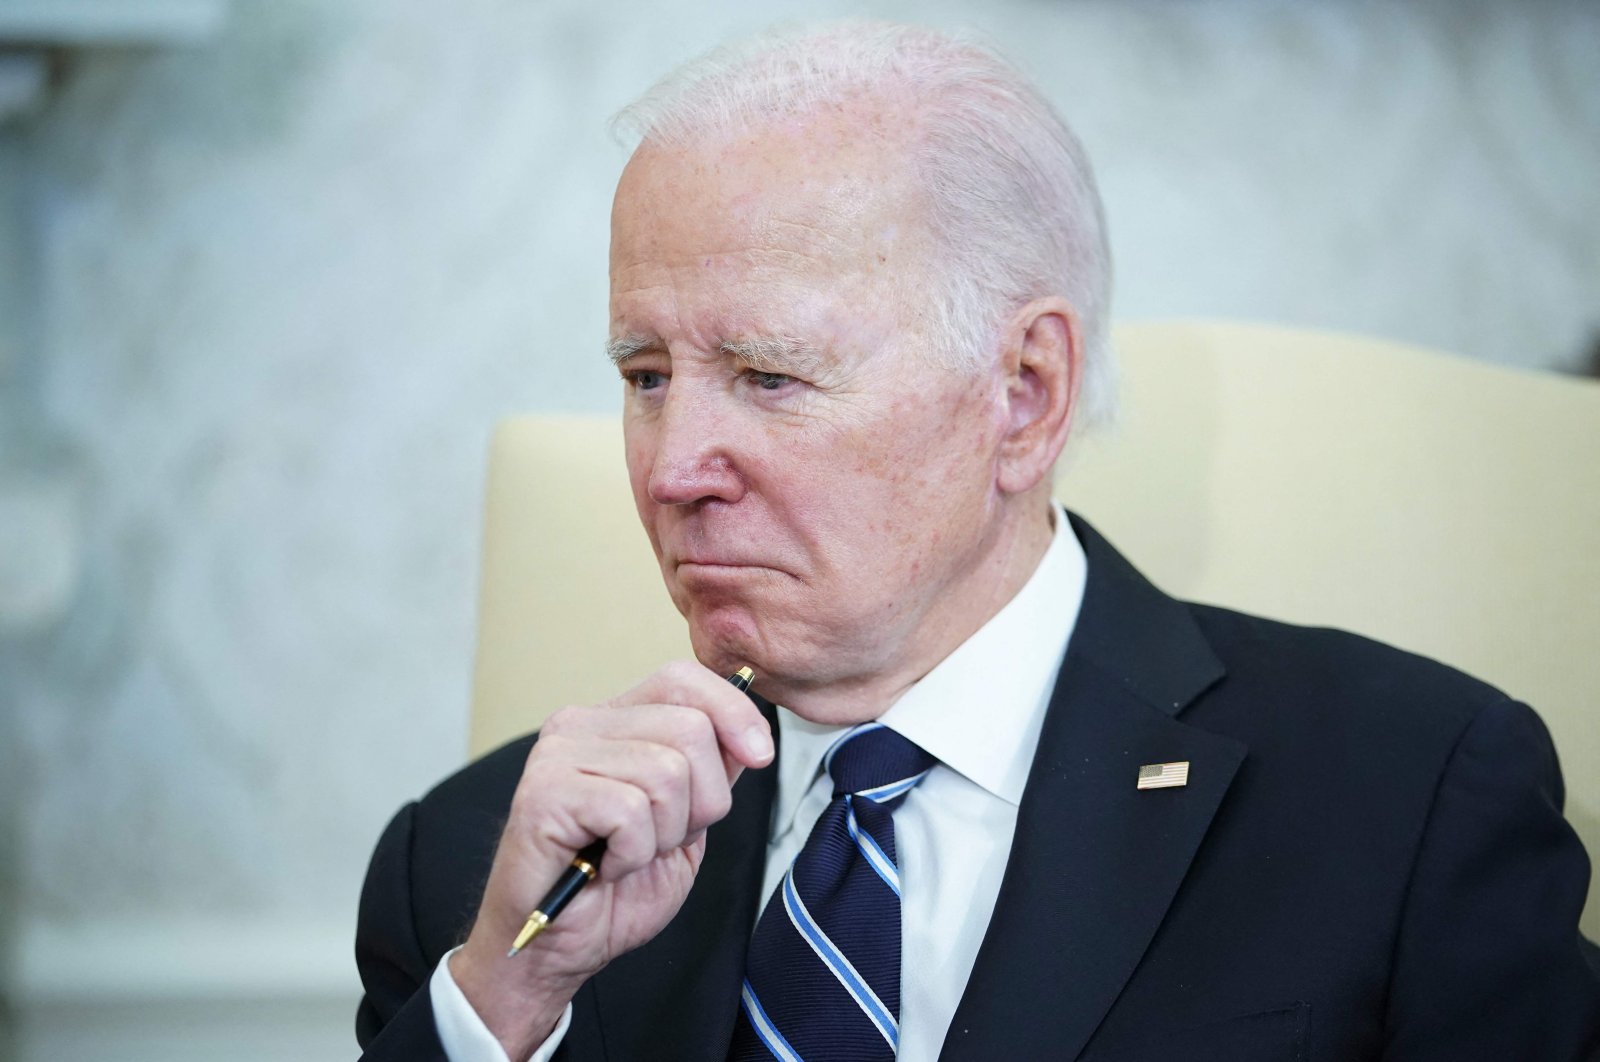 Biden’s classified docs crisis deepens with discovery of more papers